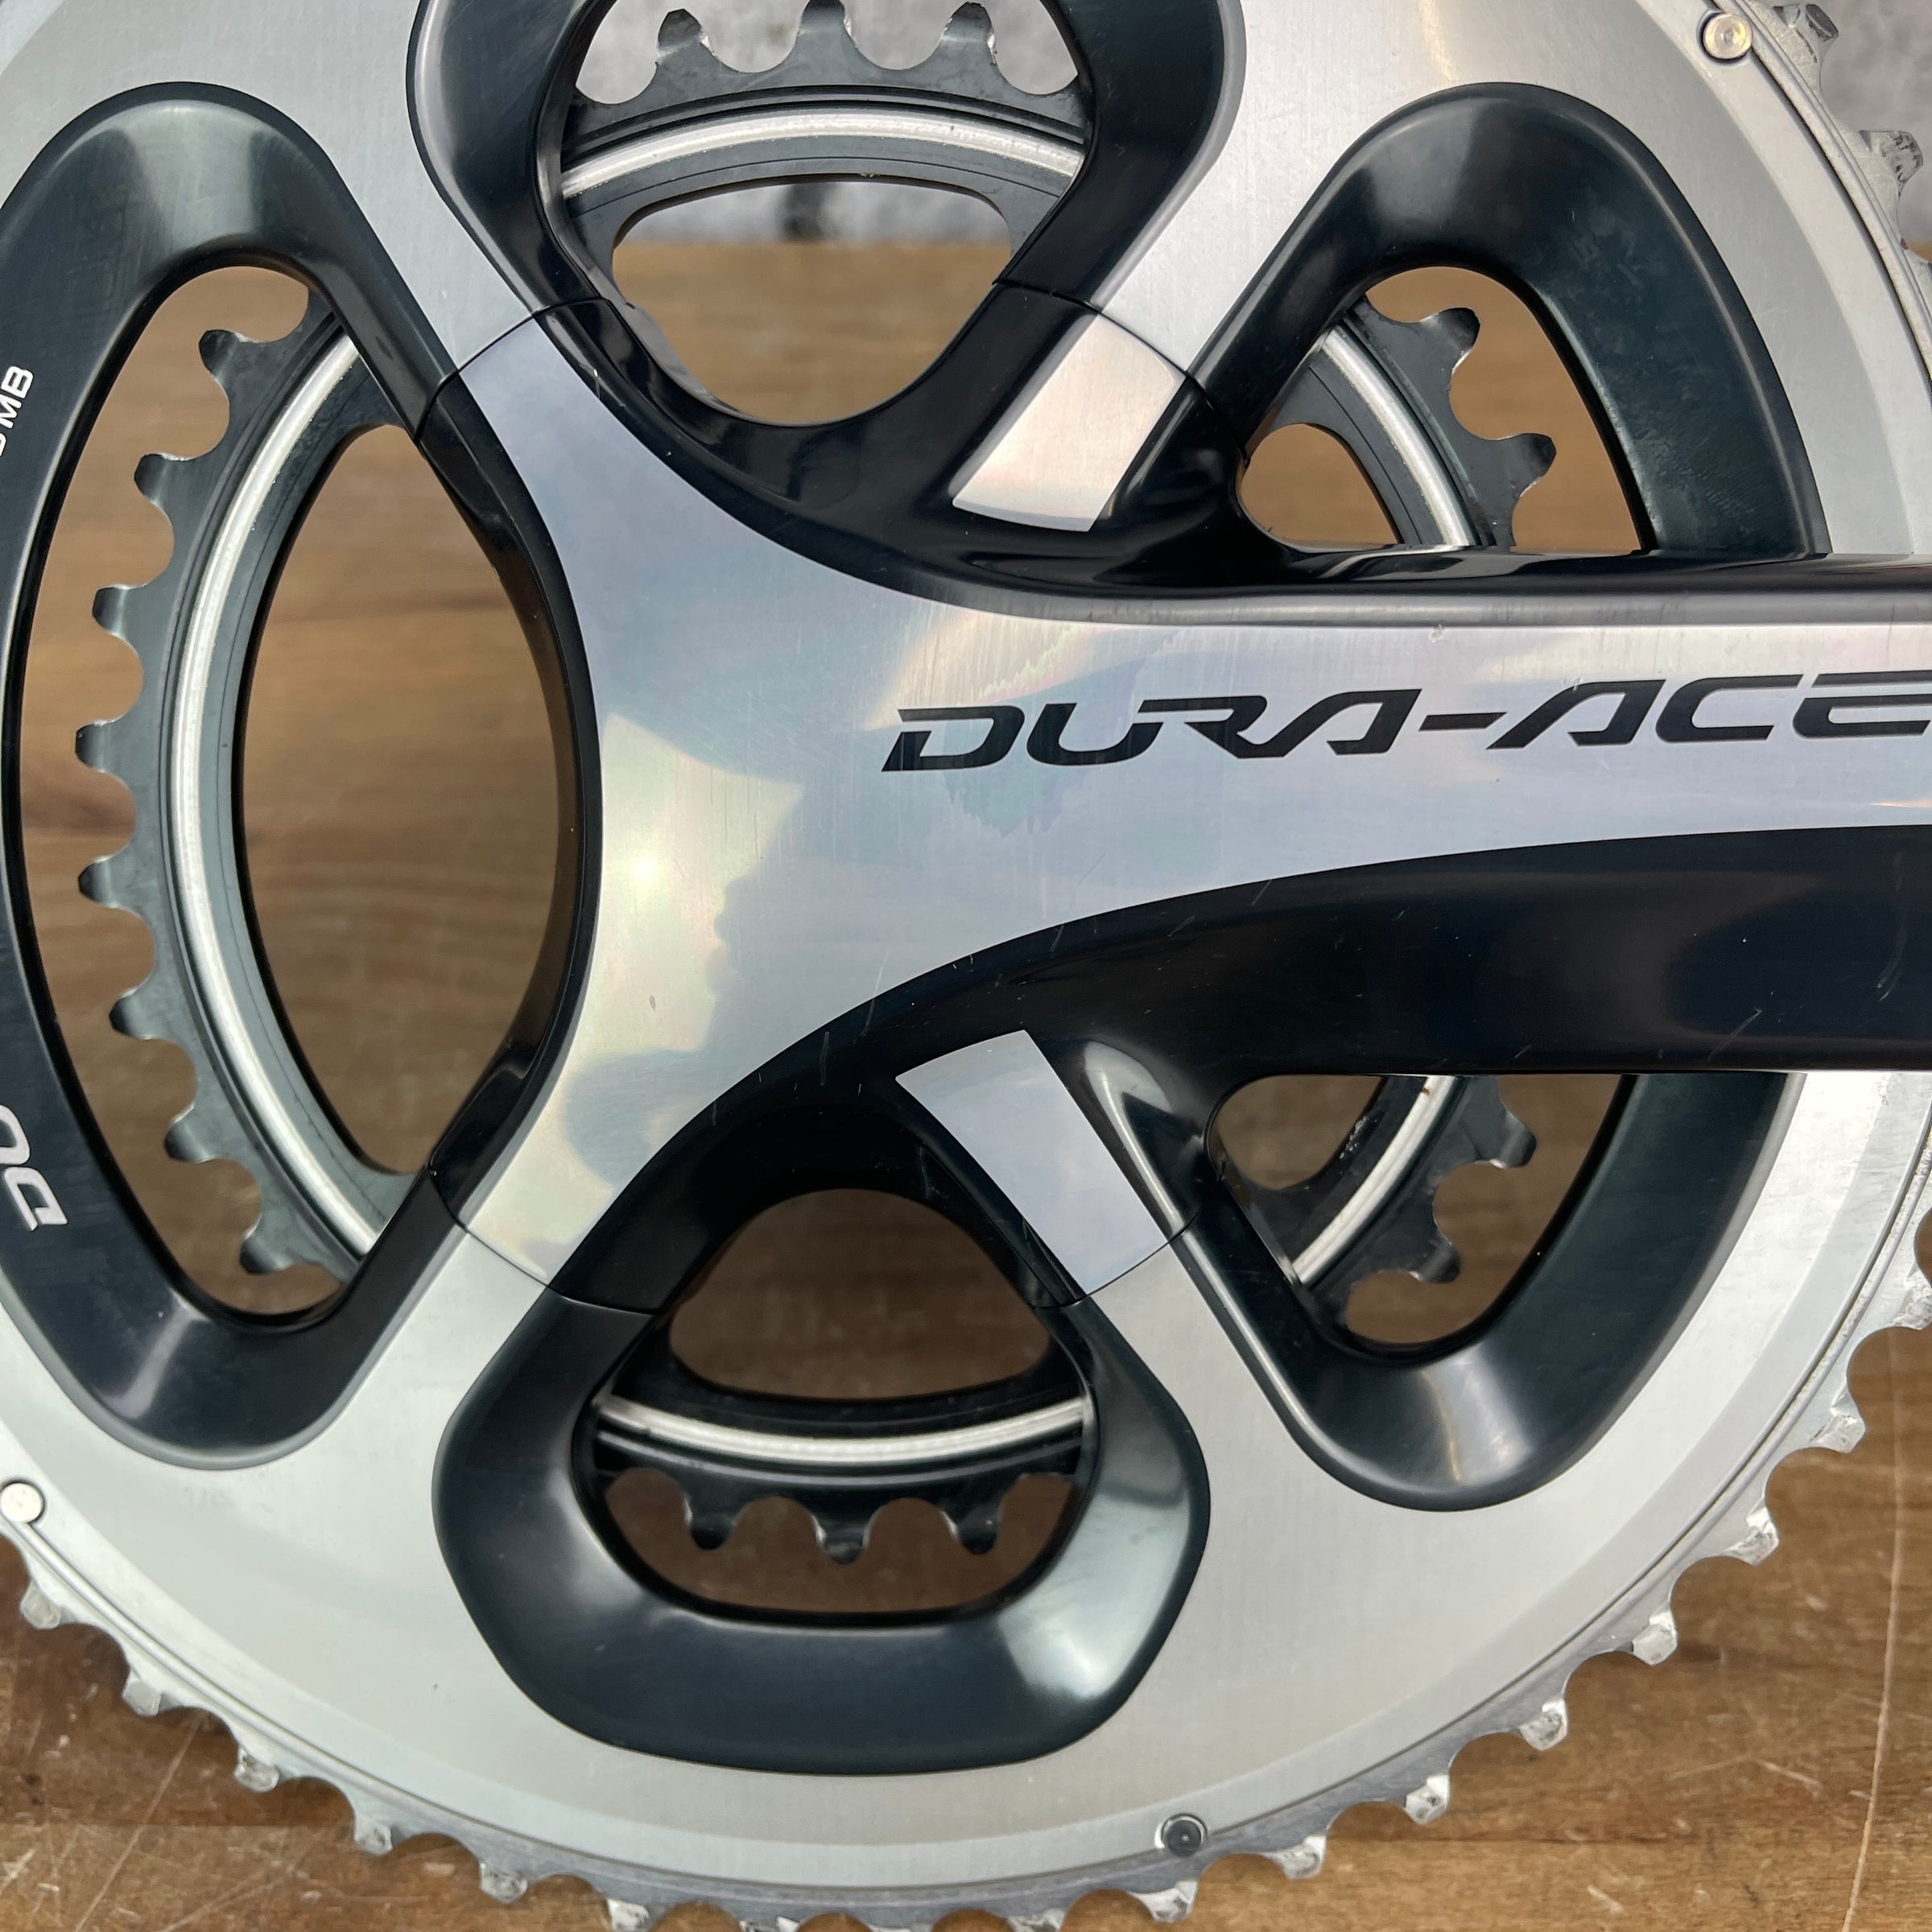 Shimano Dura-Ace FC-9000 52/36t Stages Left Side Power Meter 